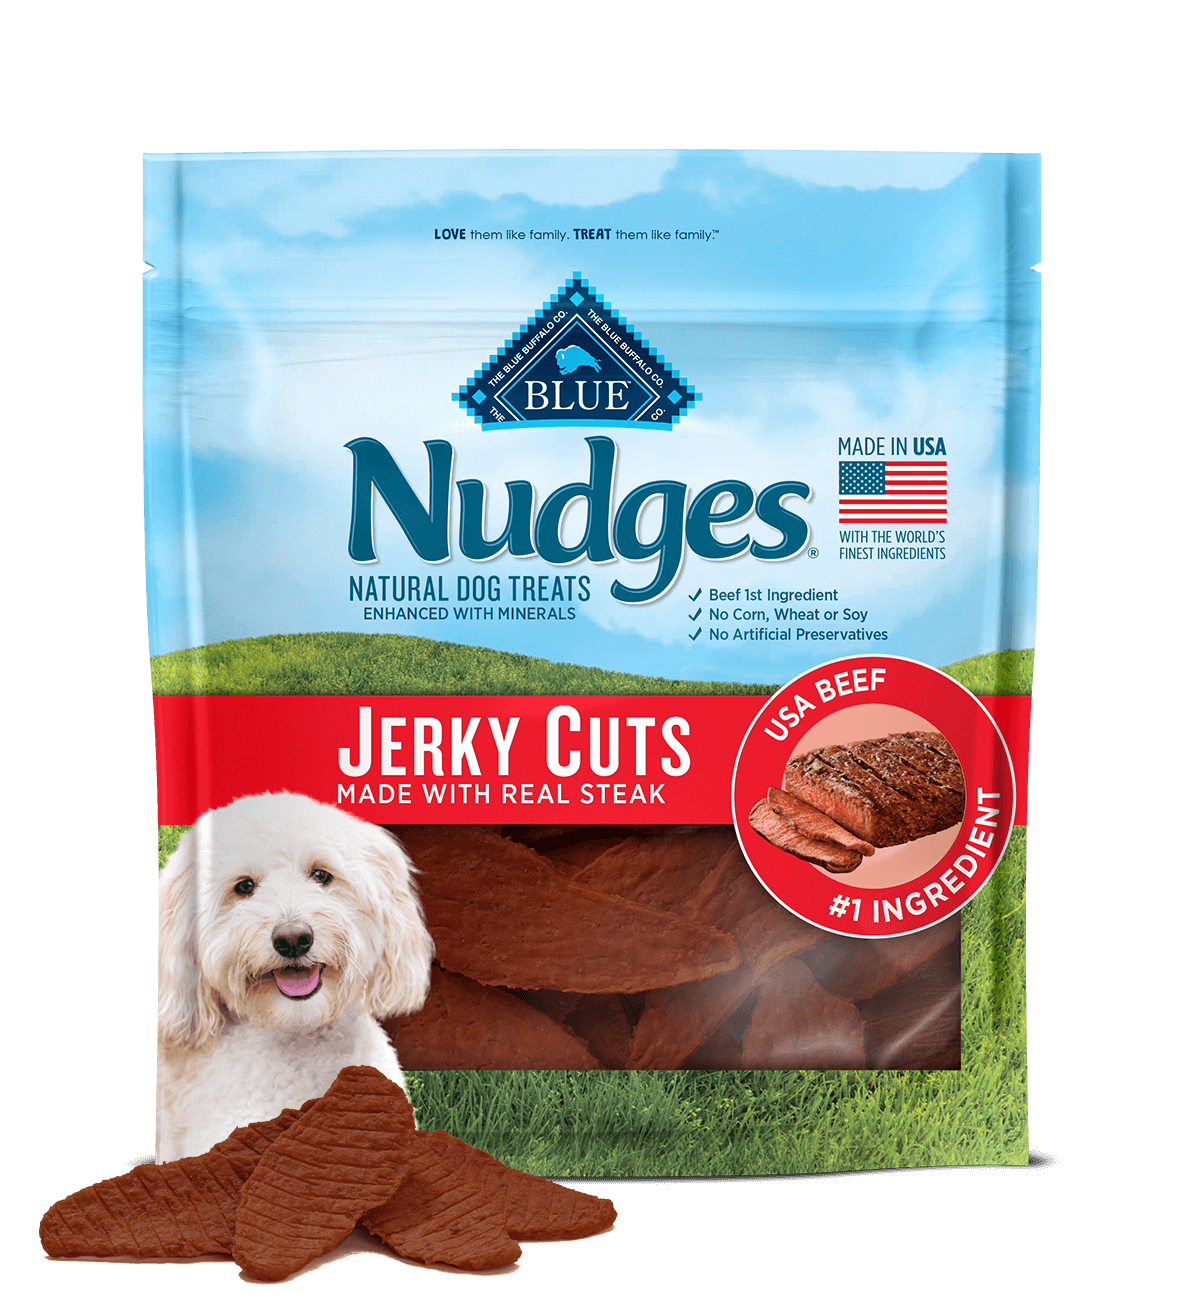 blue nudges &#174; protein-packed steak jerky cuts dog treats